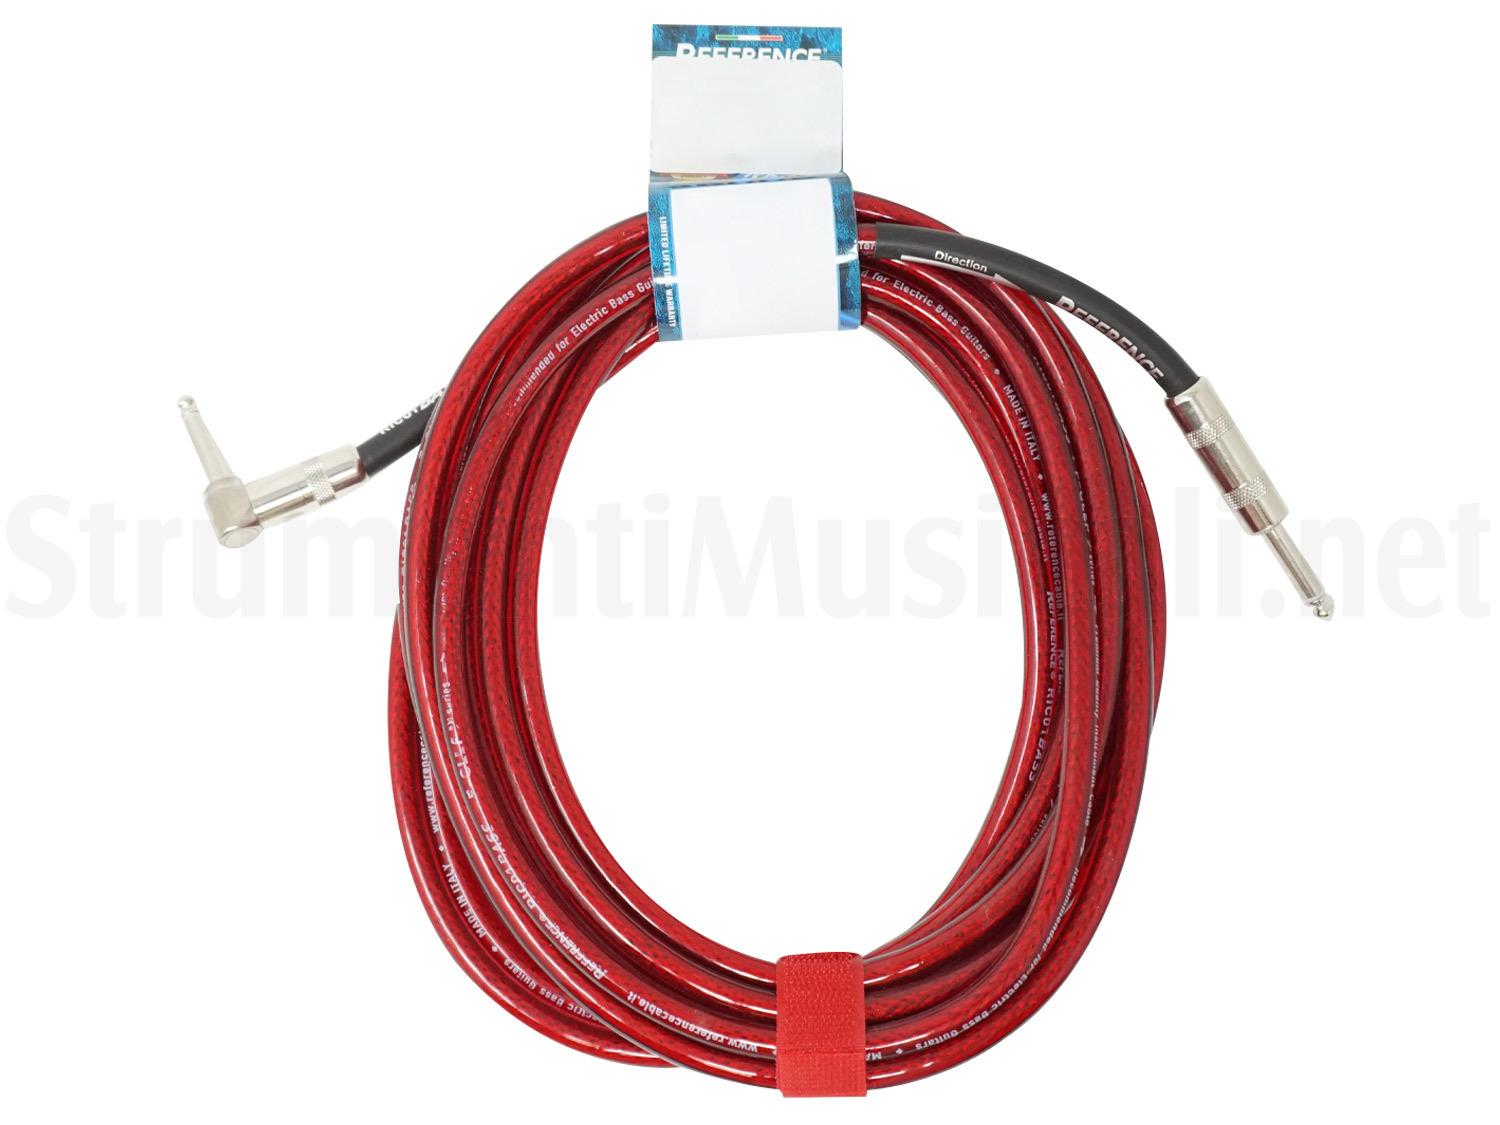 Reference Cables RIC 01 ライブ用 黒 ストレート-Ｌ字 3m